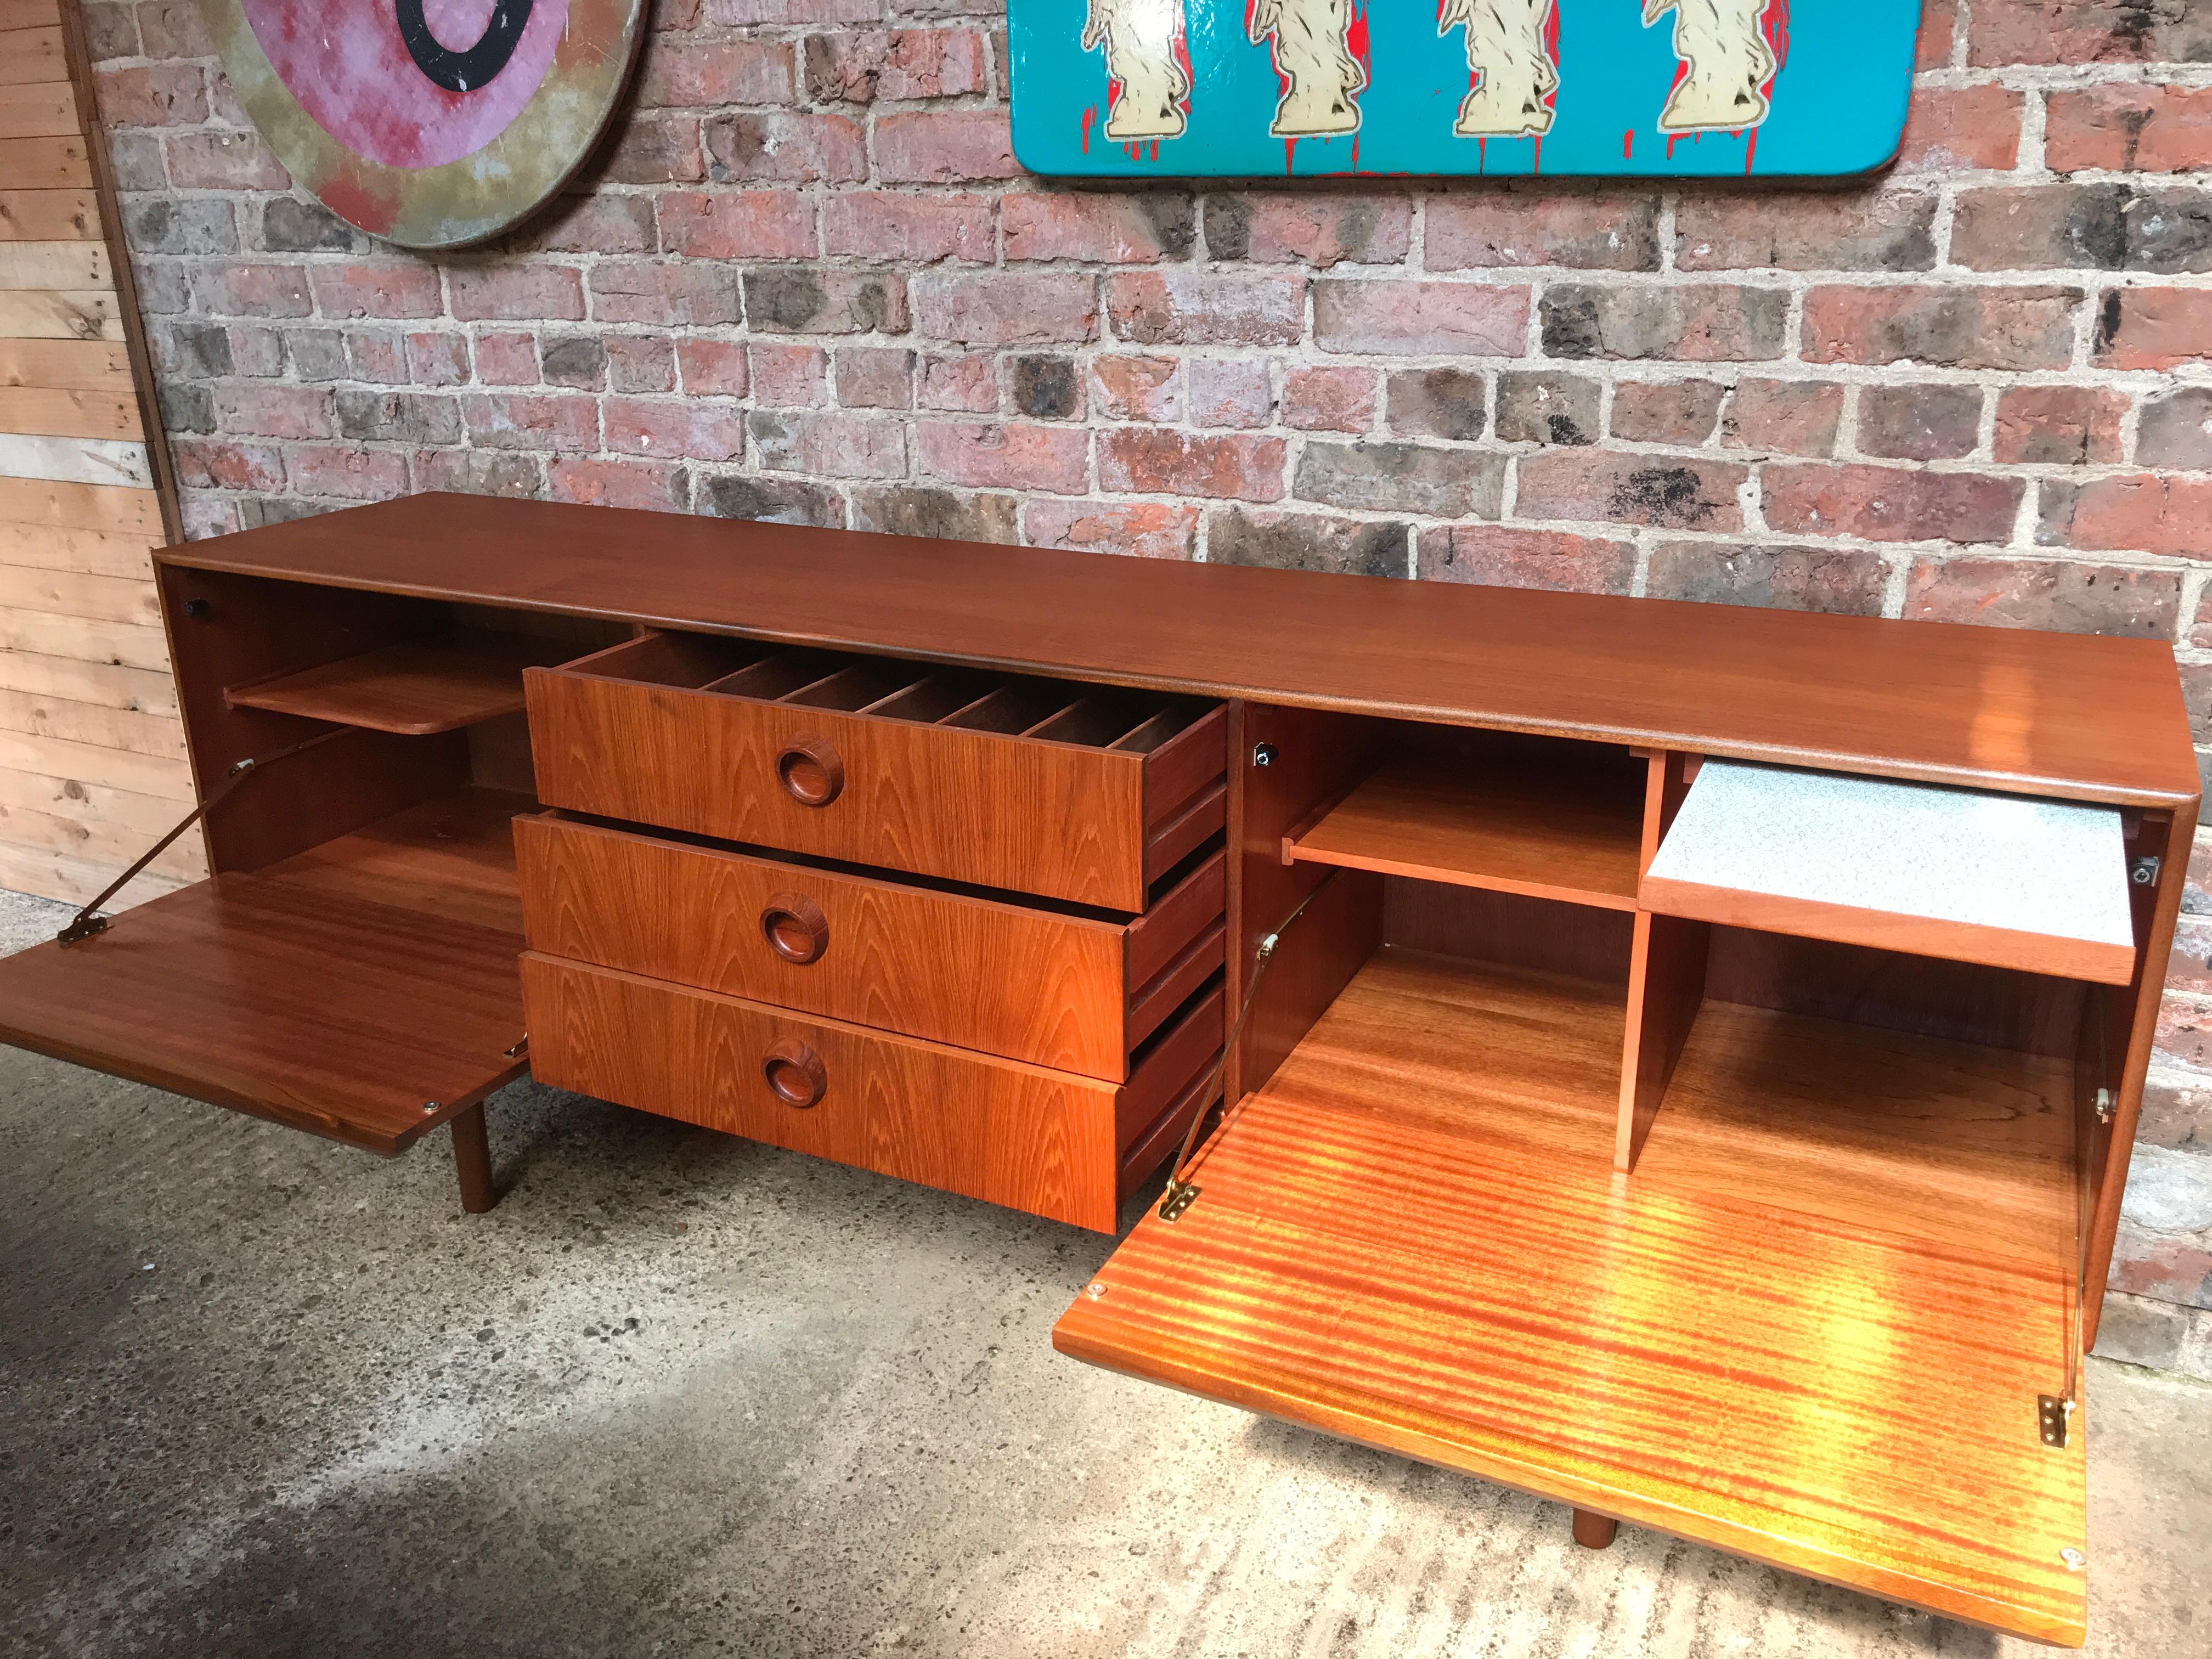 Vintage 1960s McIntosh sideboard by Tom Robertson. It has three drawers, cupboard space, and a drinks section with a useful pullout shelf. Credenza is in very good original condition.